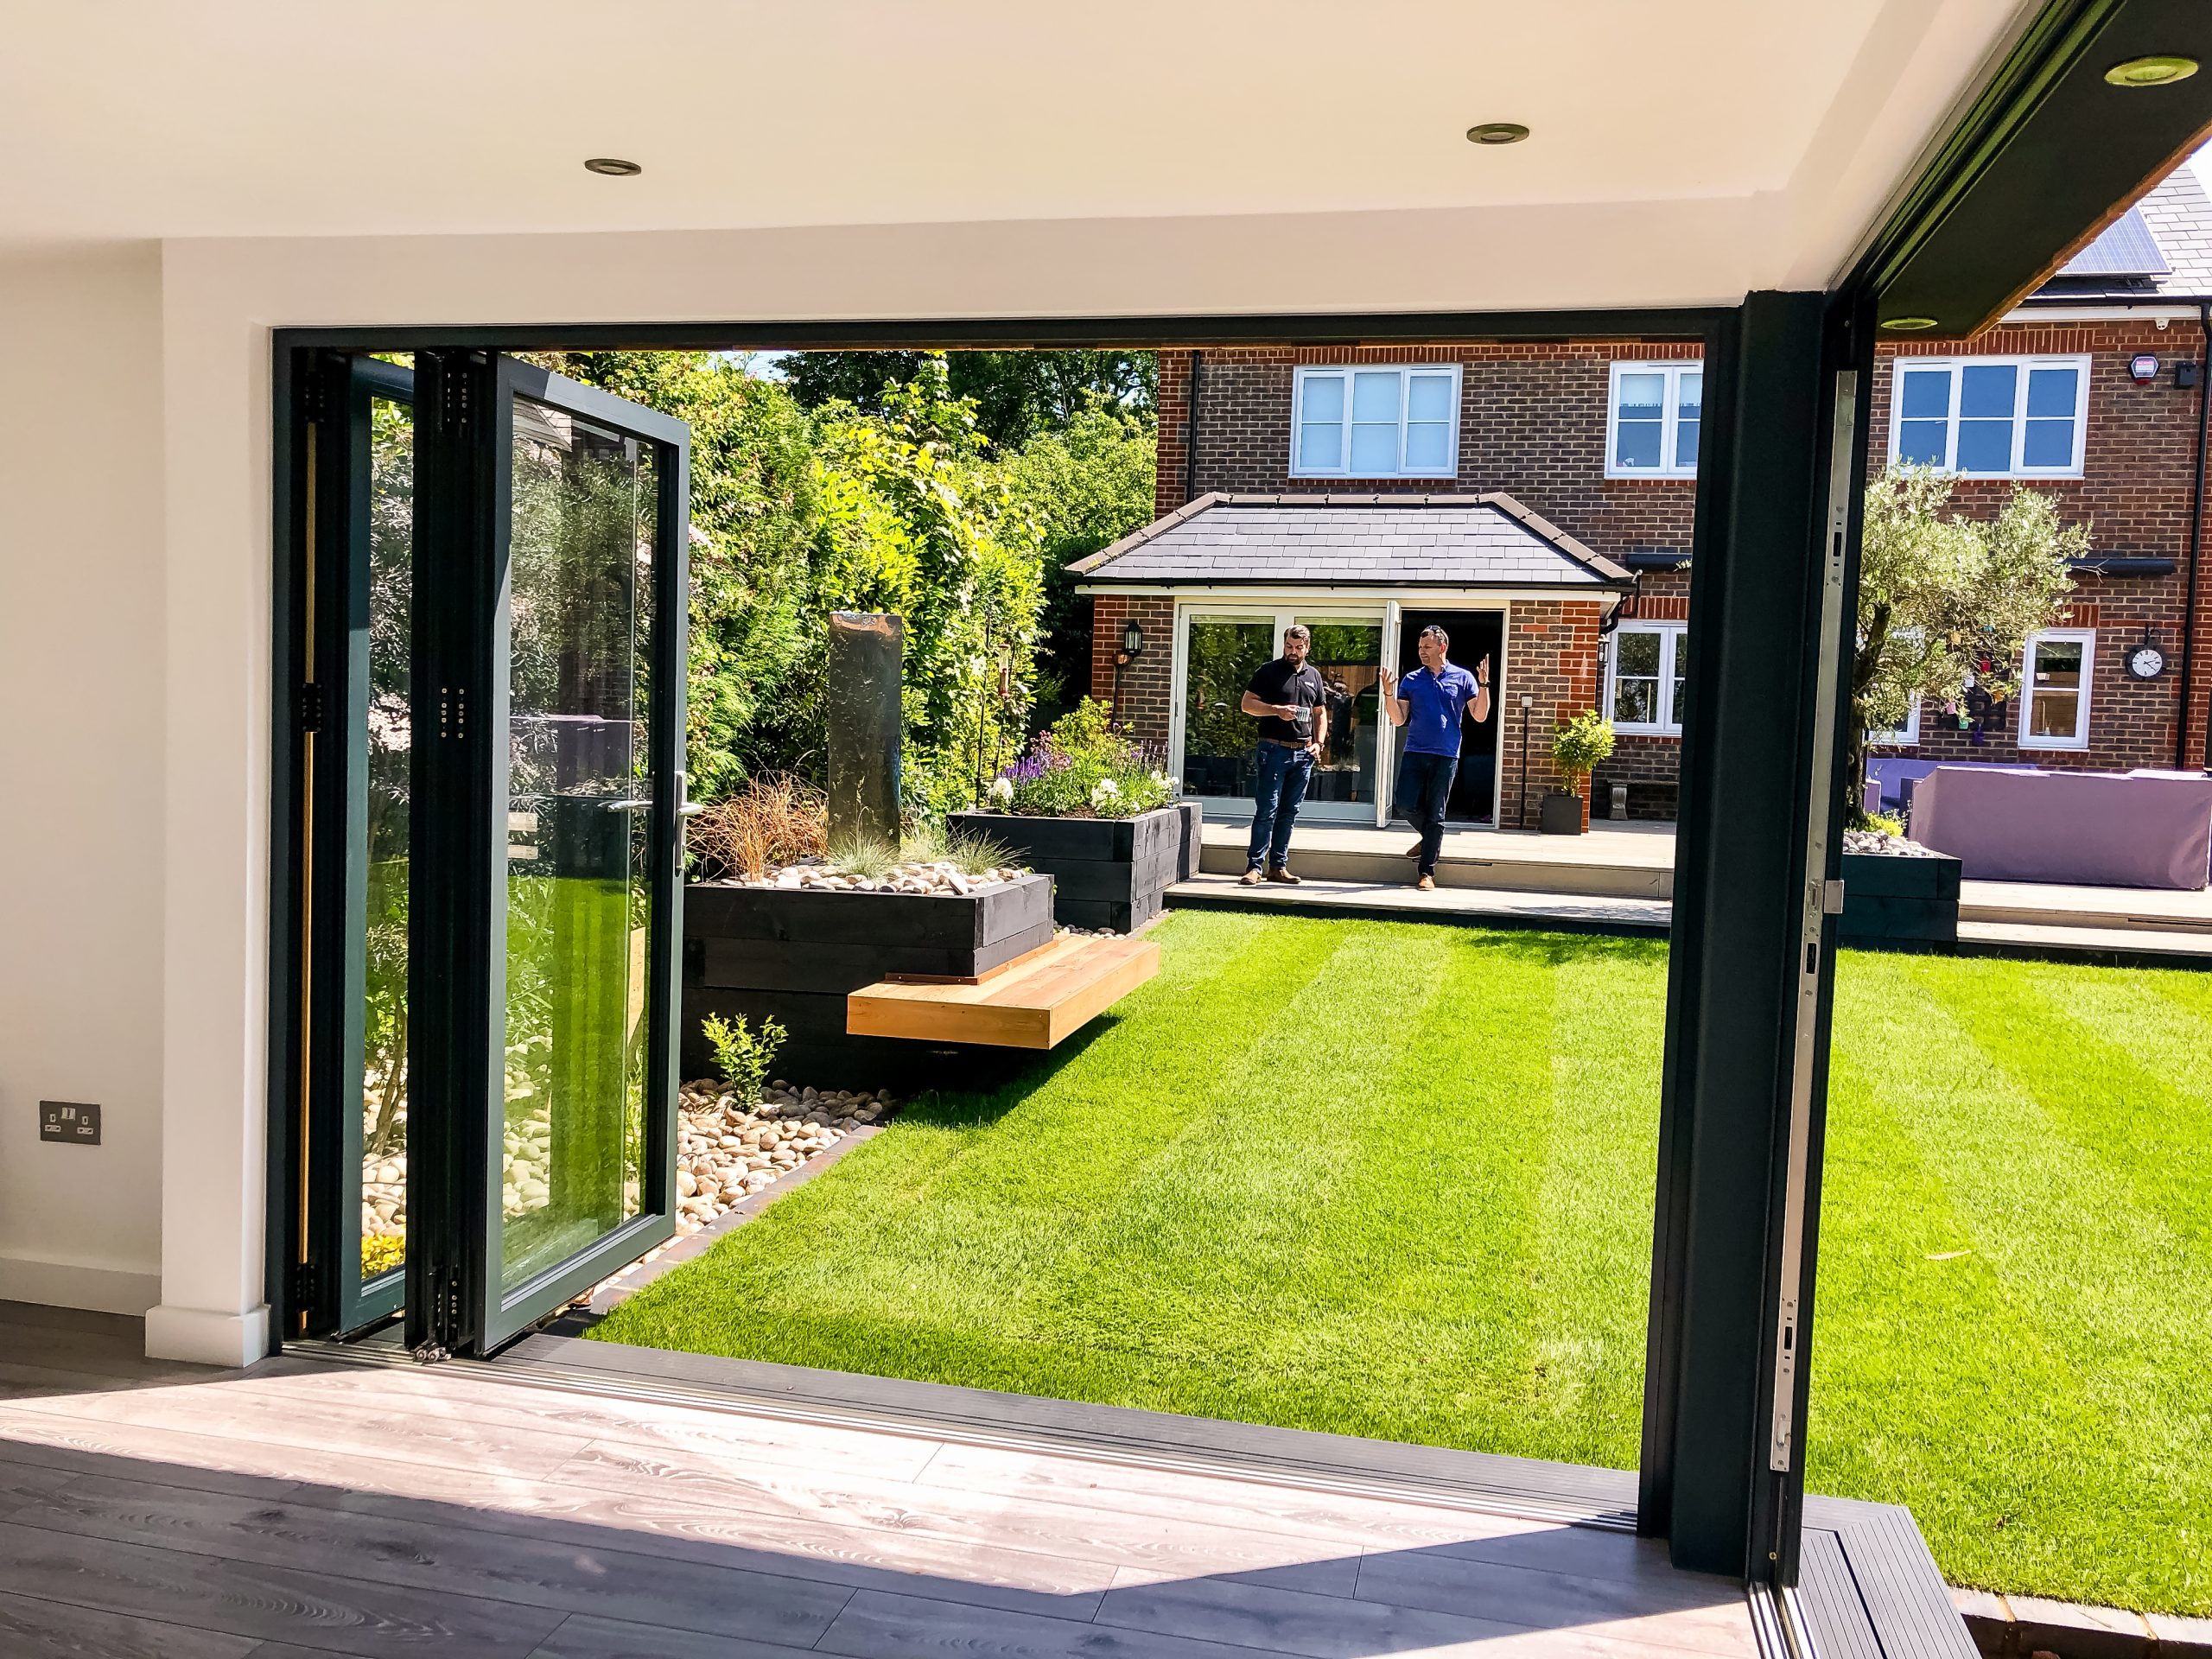 Interior view of small unfurnished Vivid Green garden room with anthracite grey framed corner bi-fold doors which open onto the garden with a wooden bench to the left of the garden and the main house with two people standing in the background